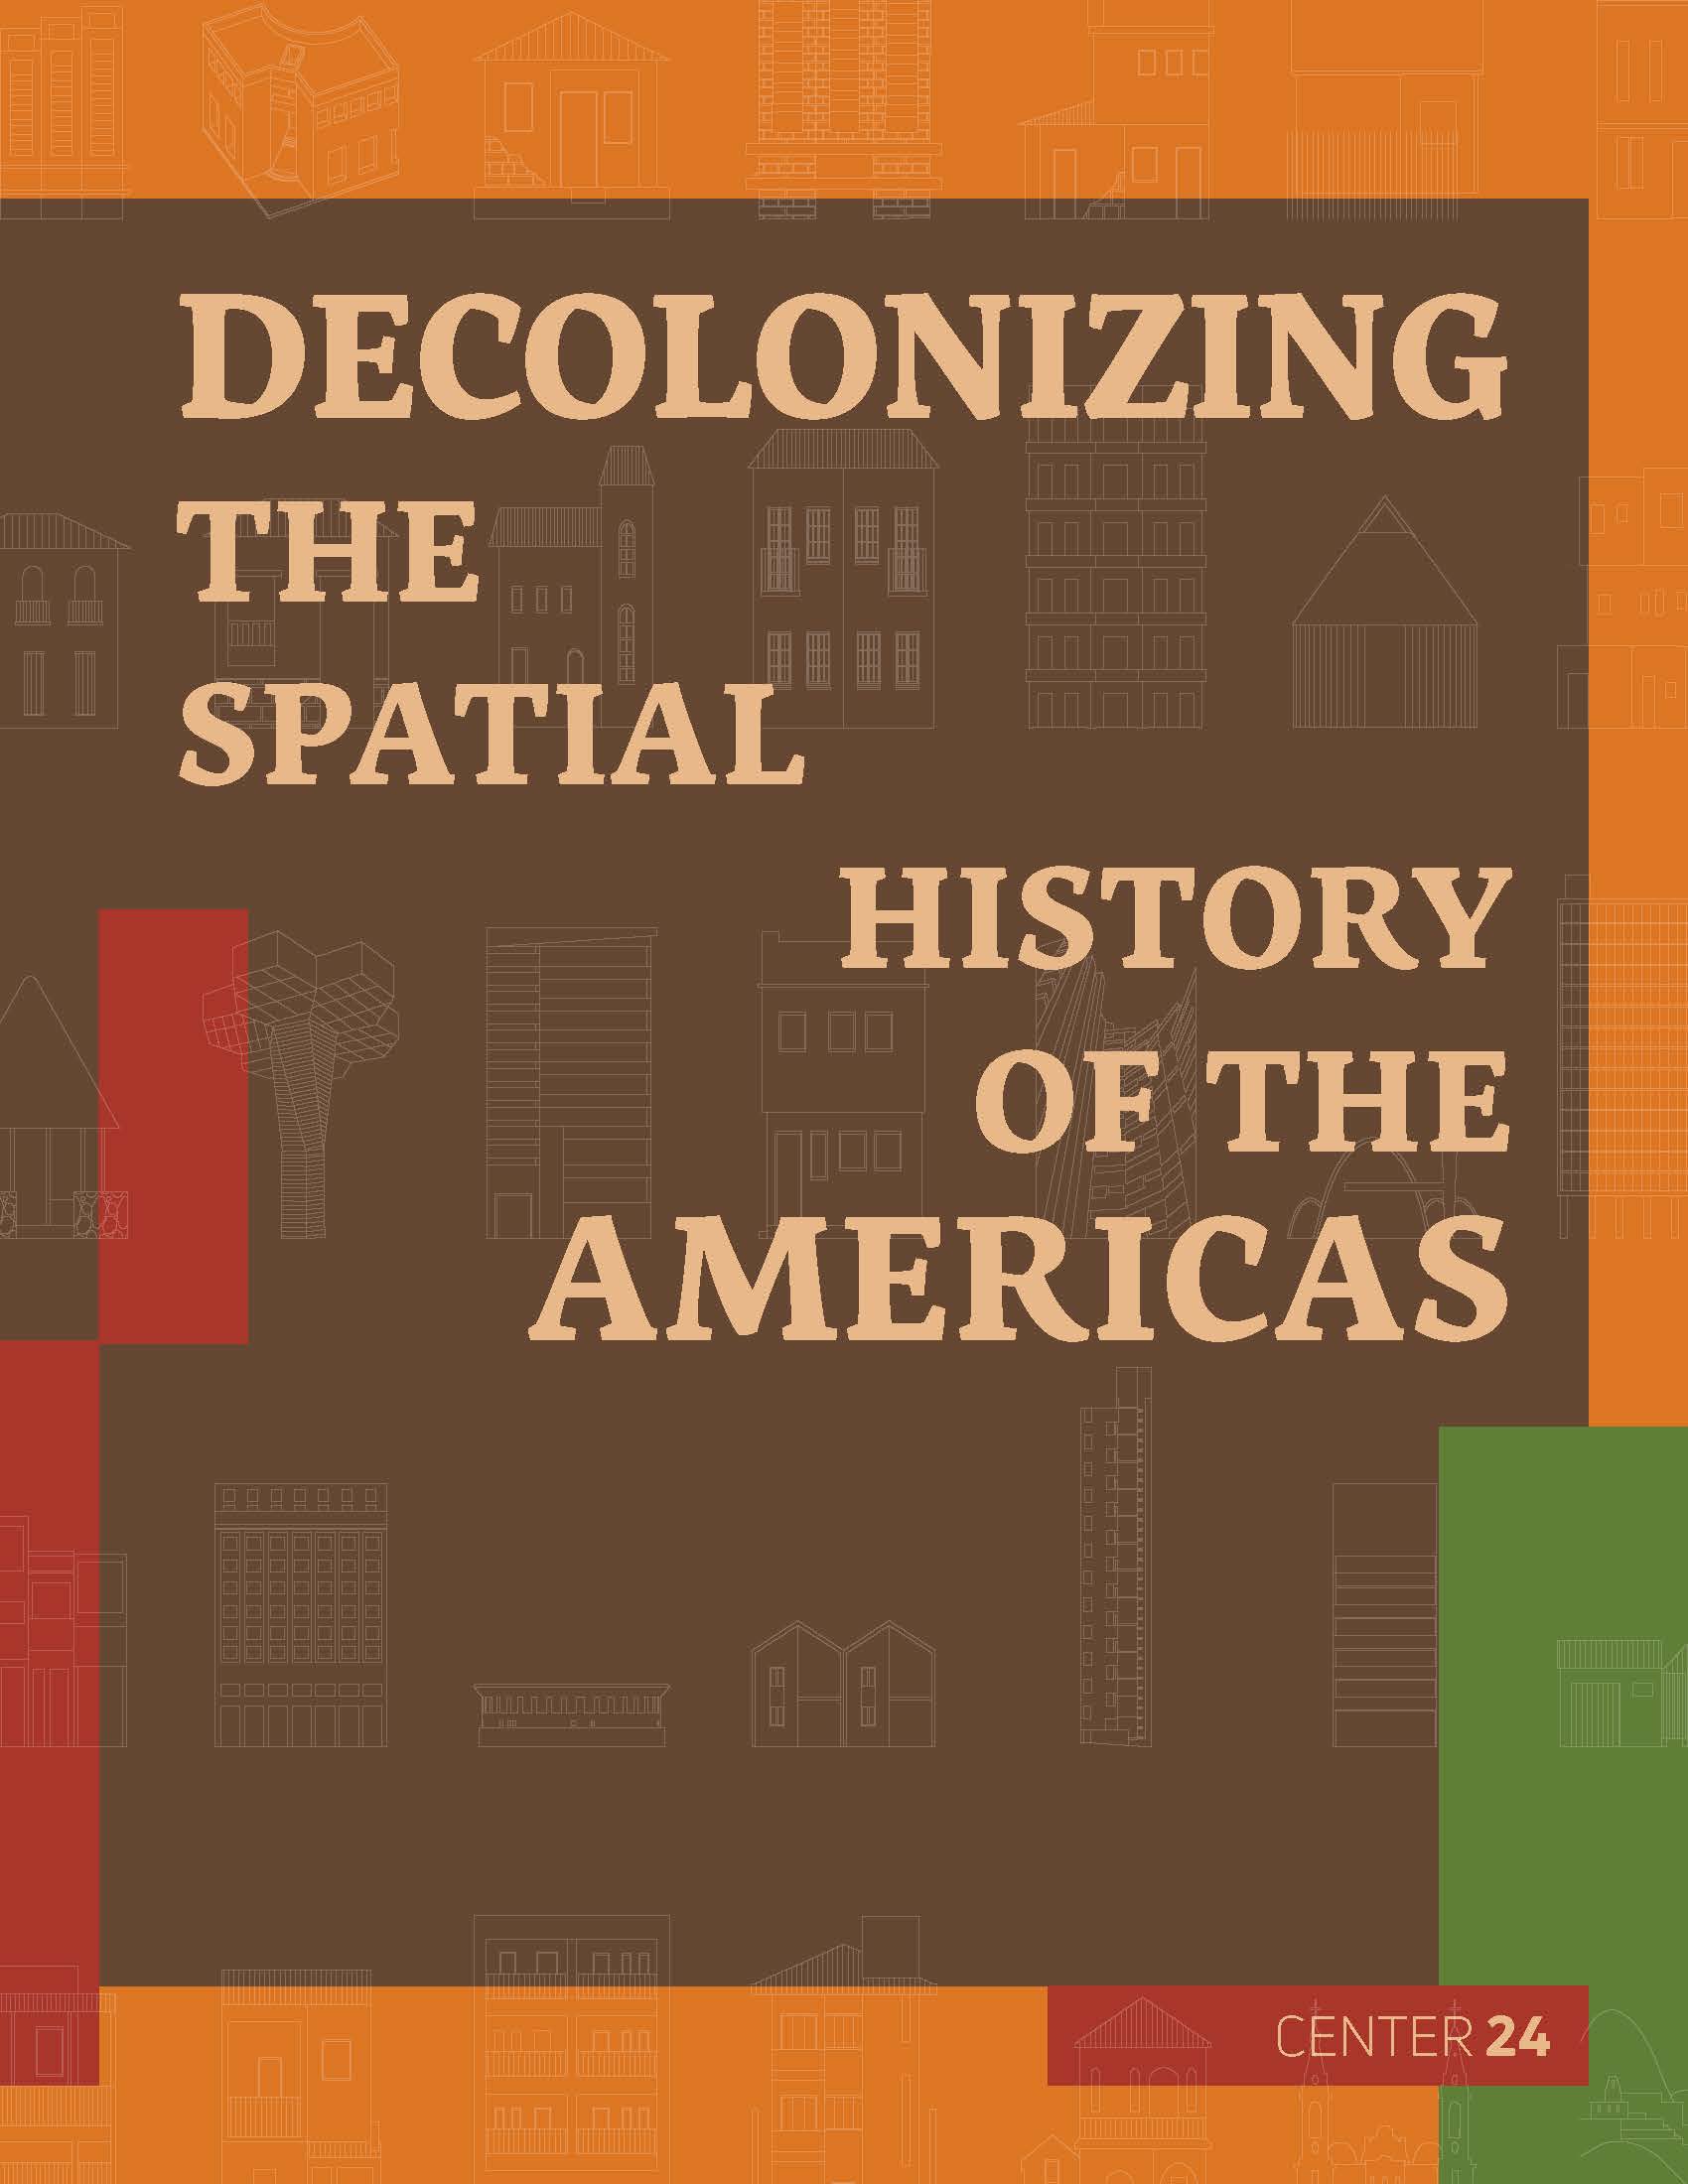 "Decolonizing the Spatial History of the Americas" on muted tones